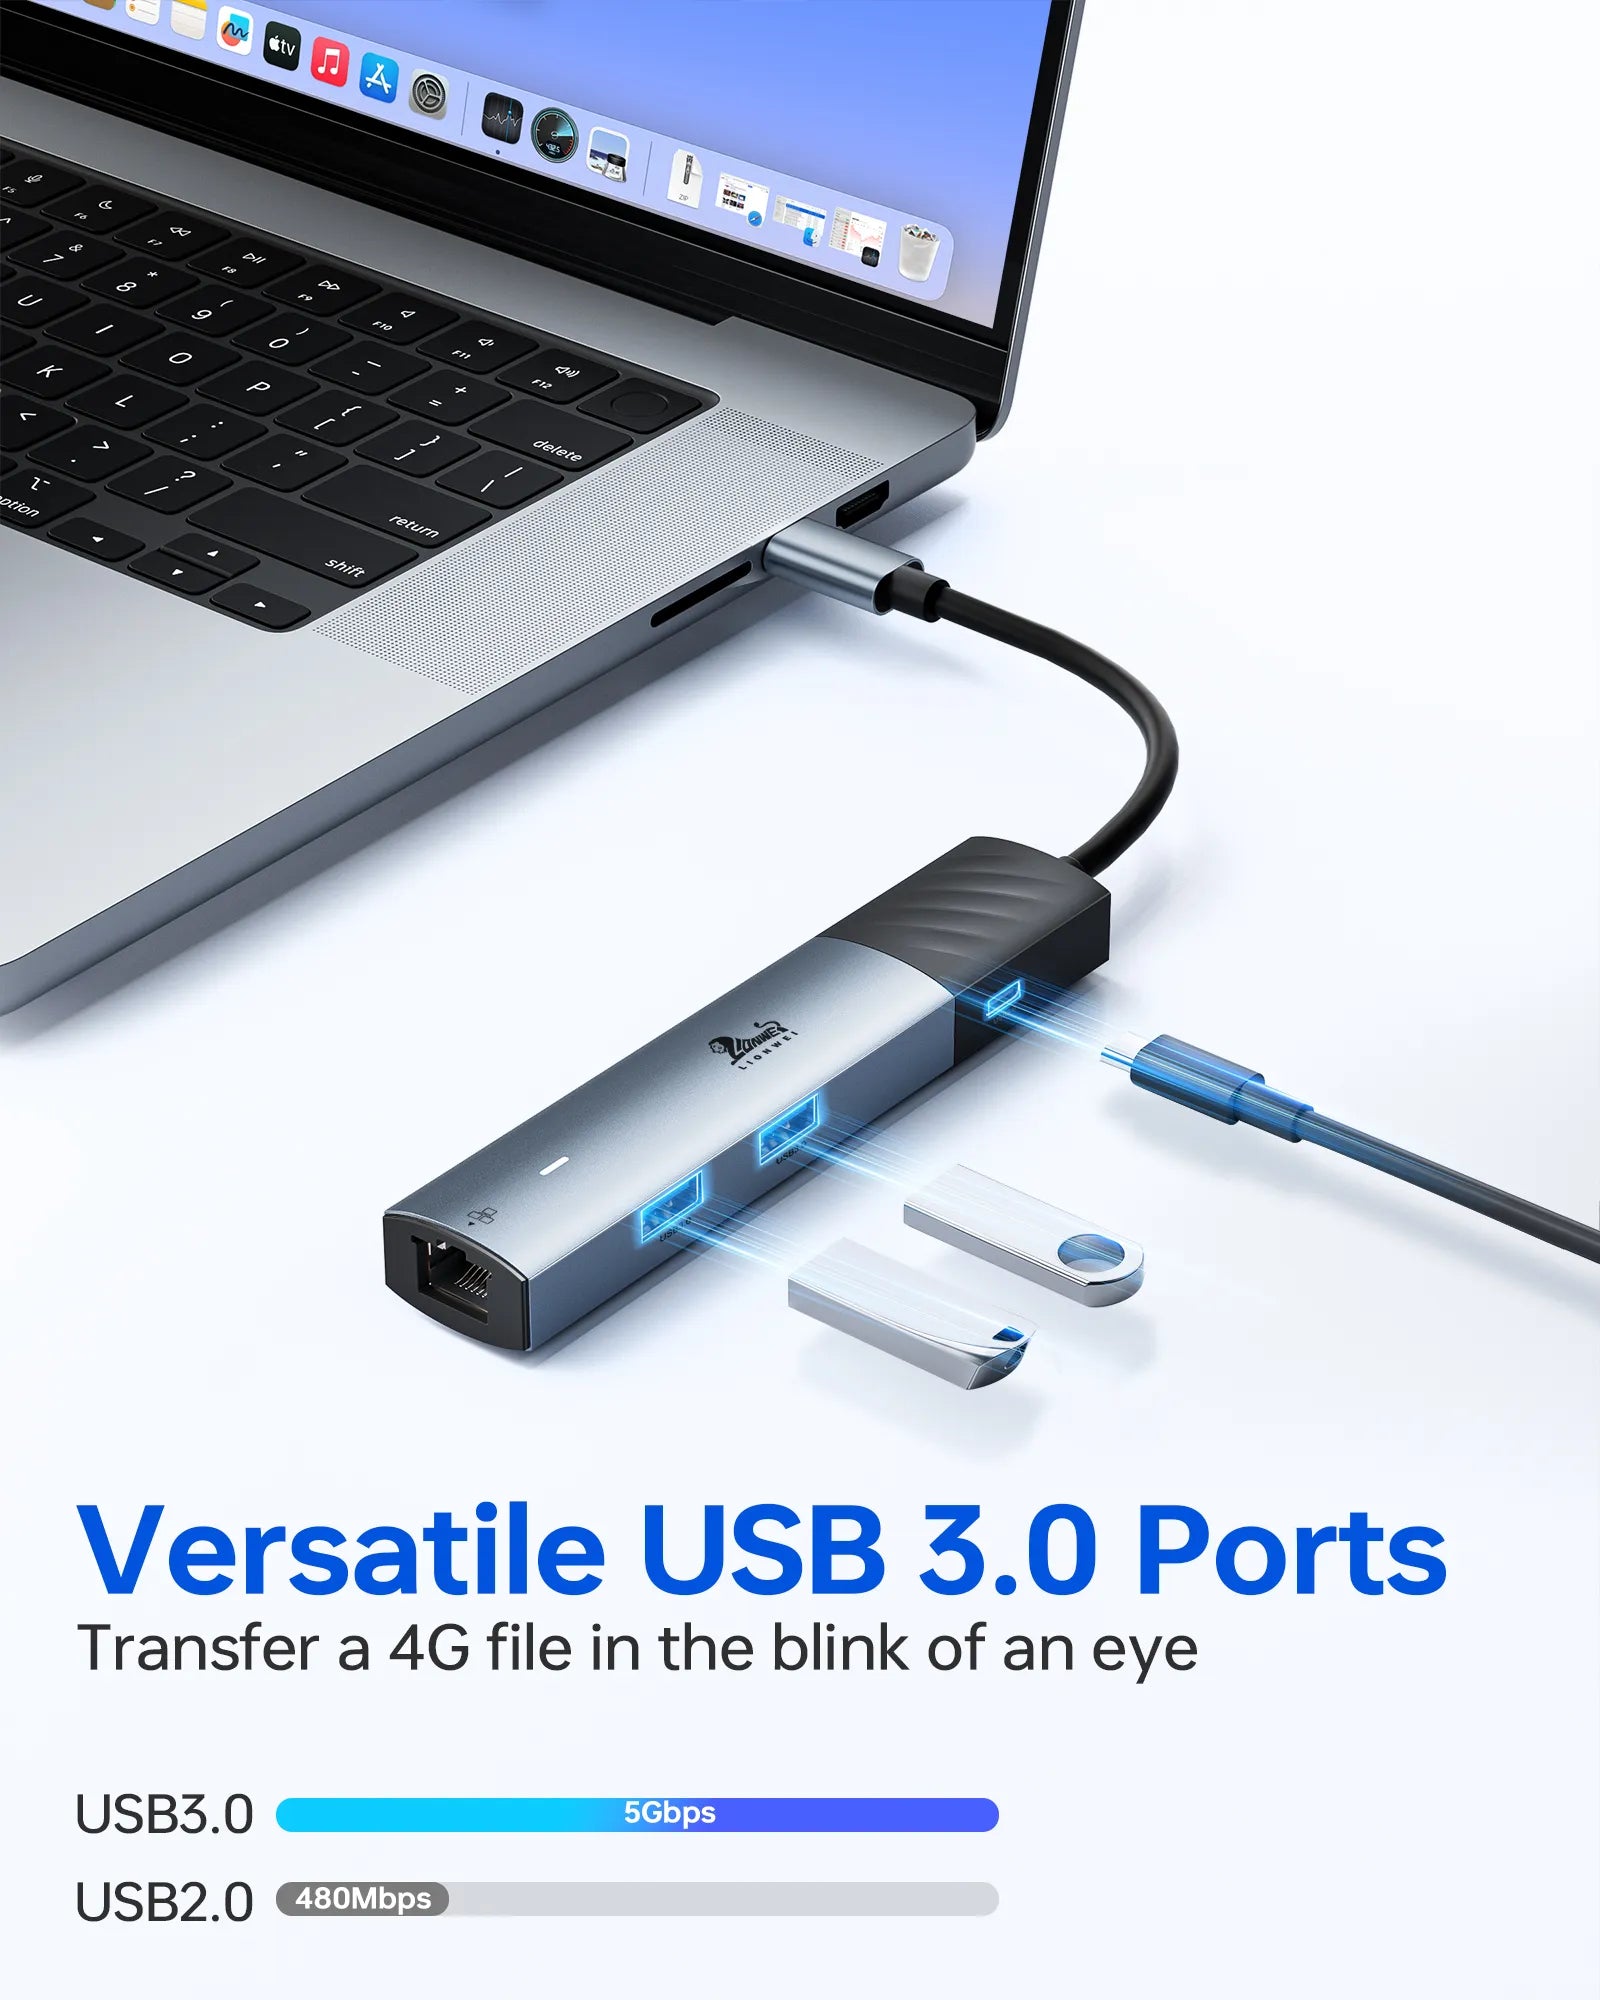 lightning-fast 5Gbps data transfer with USB 3.0 Ports